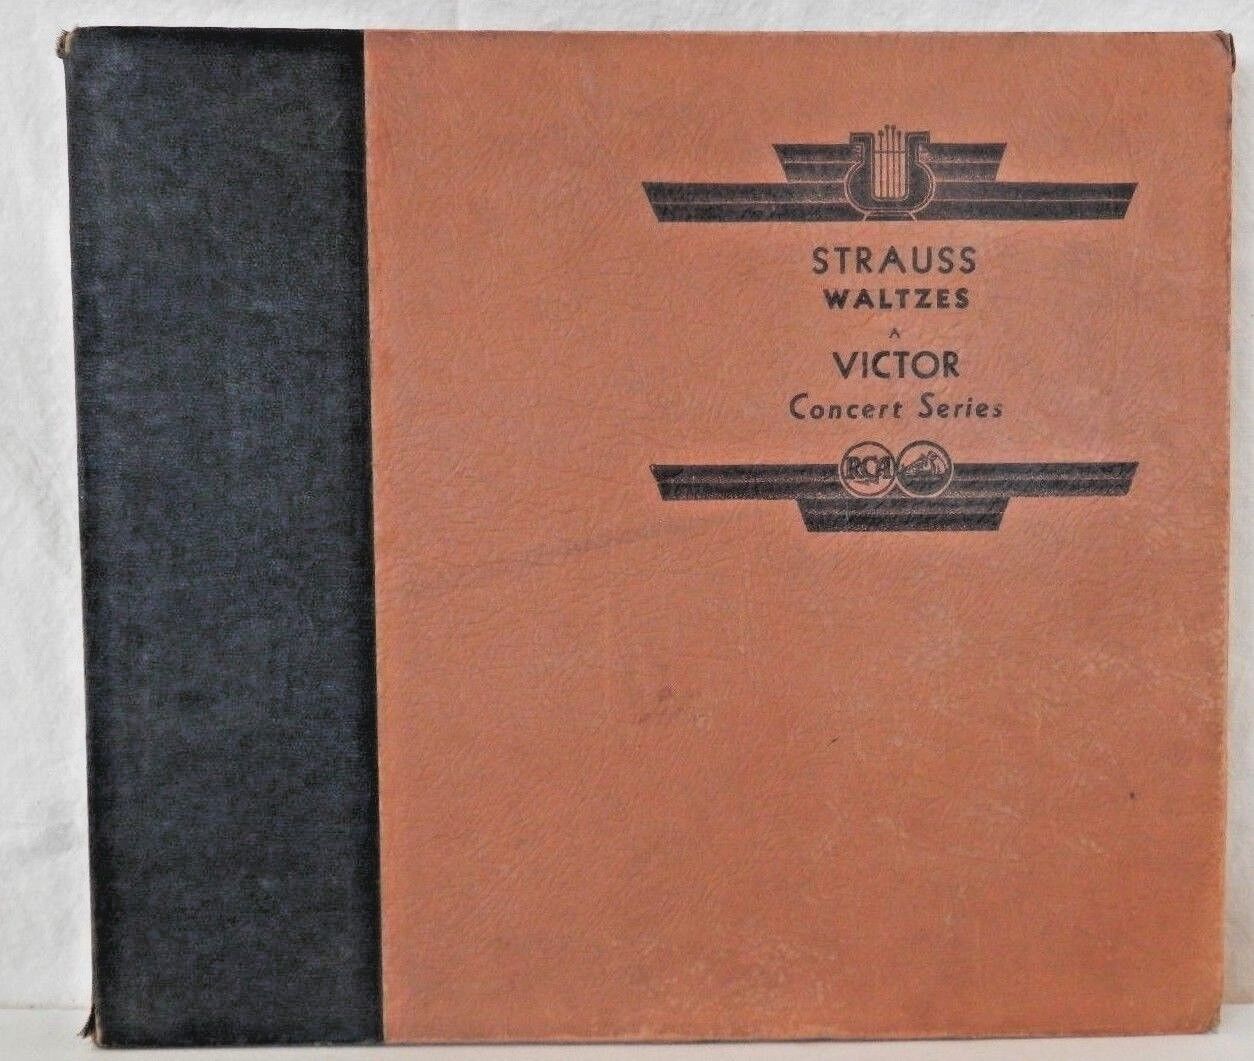 2 Vintage Albums Strauss Waltzes Victor Concert Series & Music of with 5 records